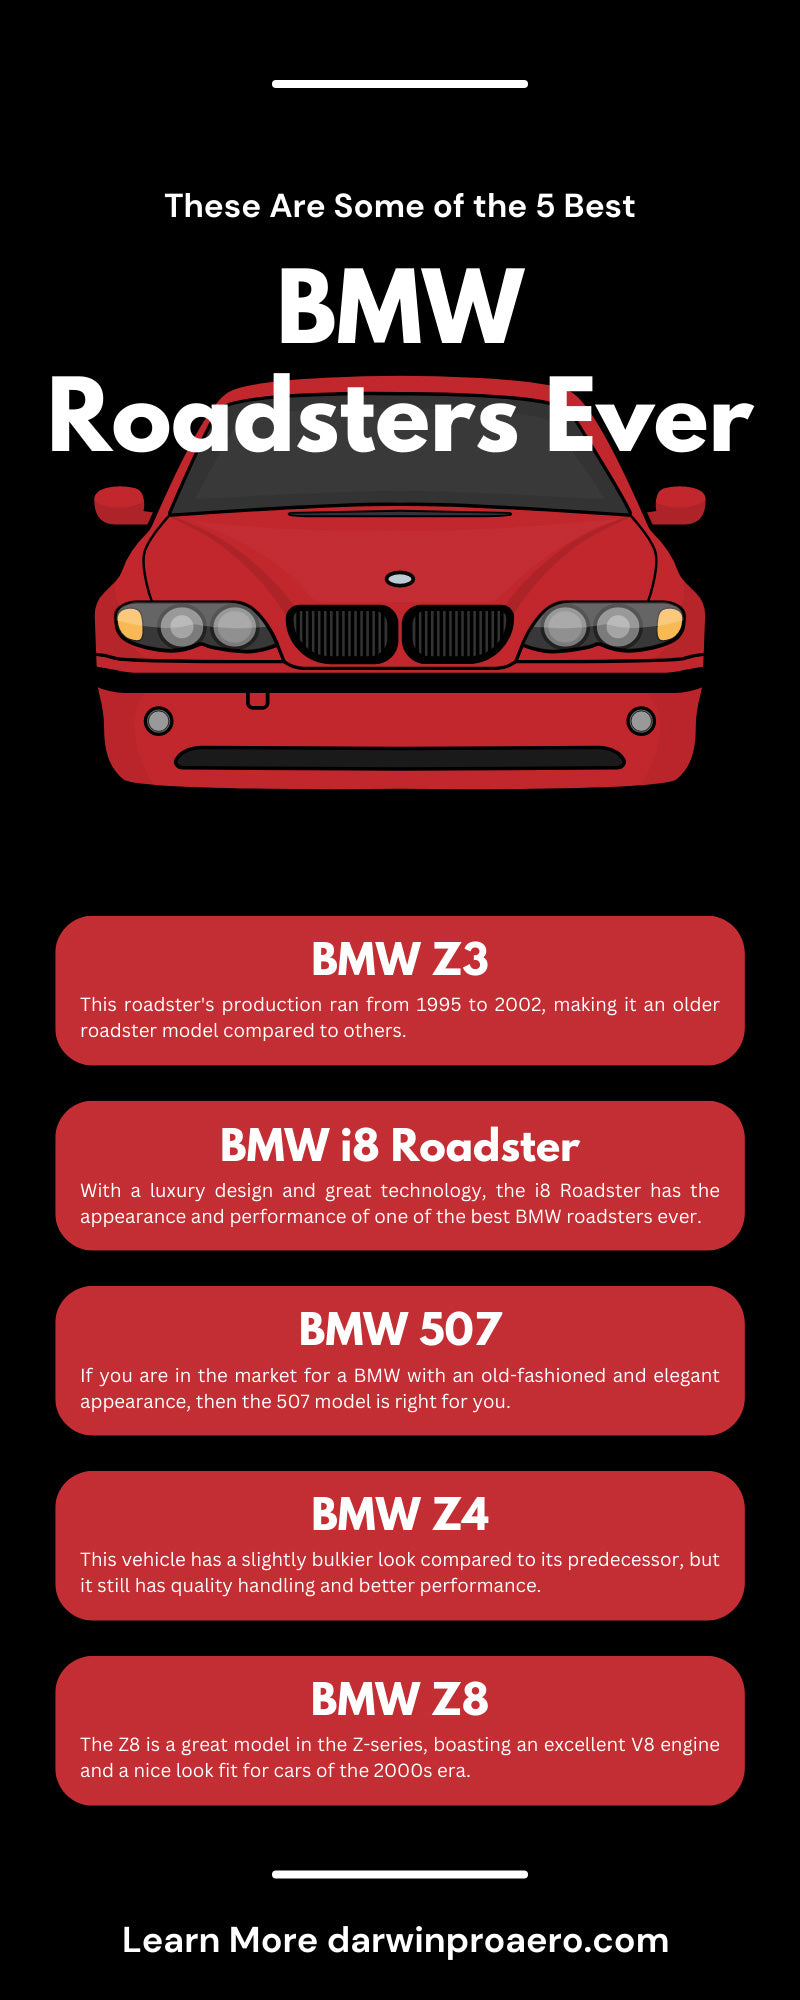 These Are Some of the 5 Best BMW Roadsters Ever